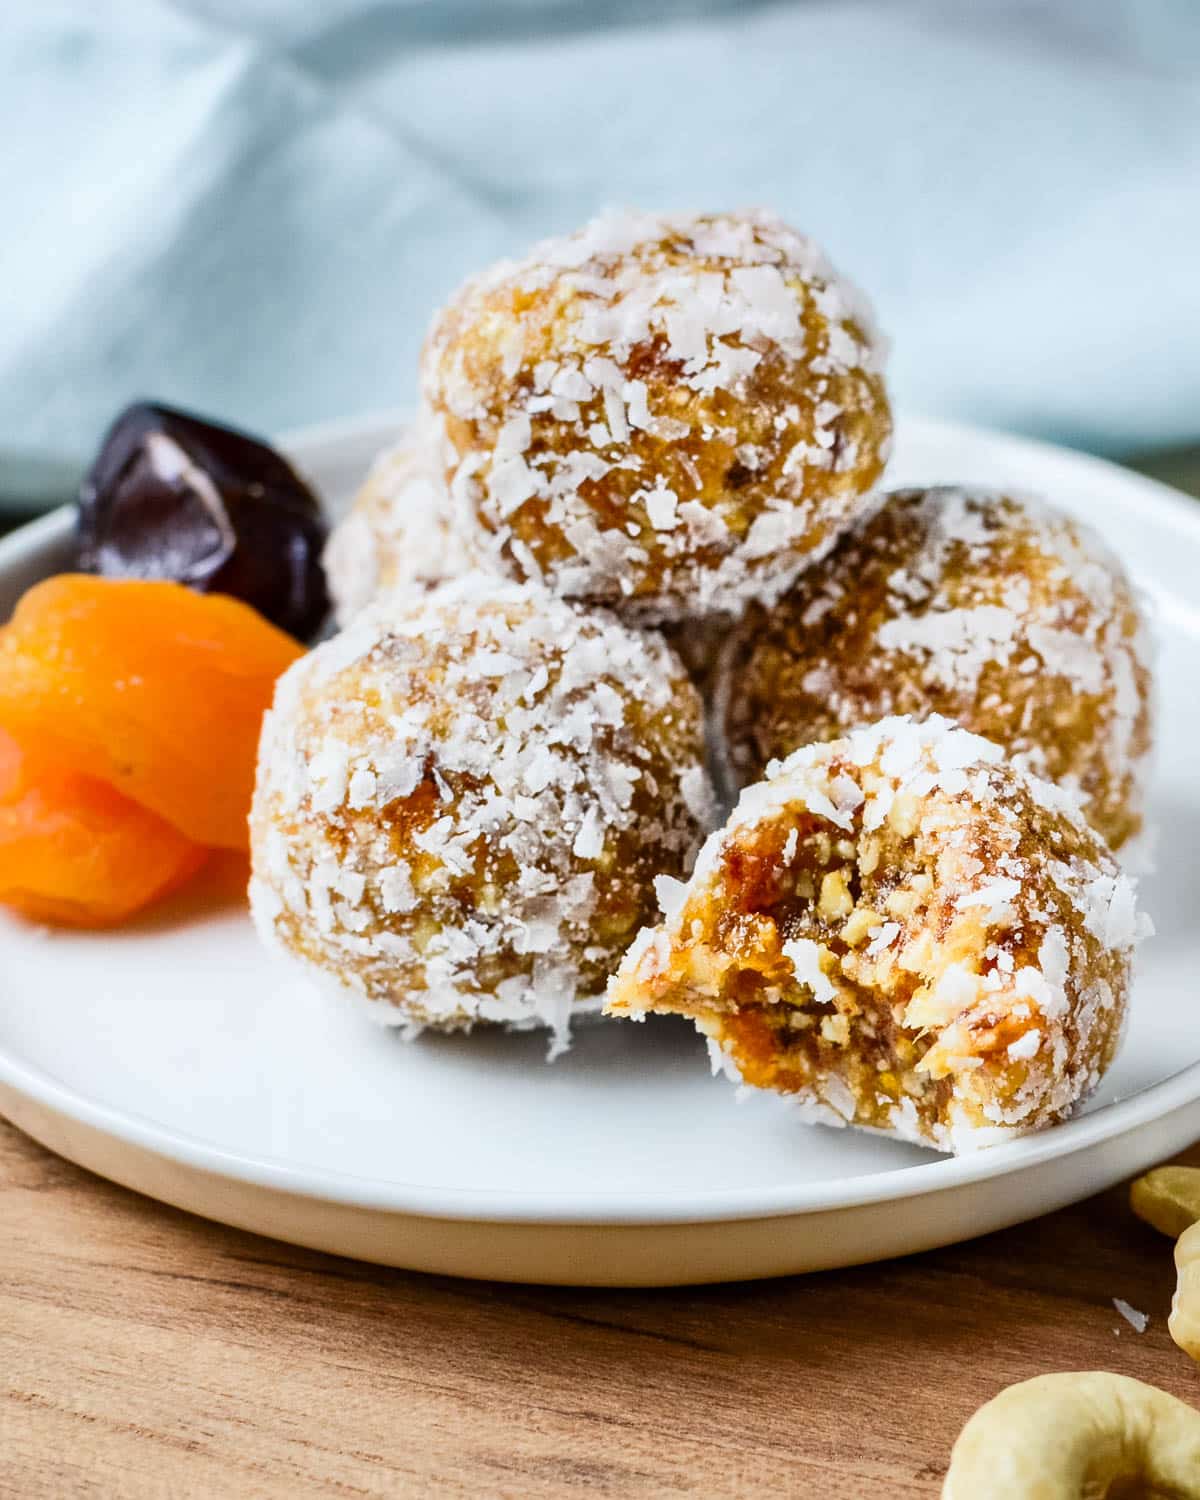 apricot date bites on a plate.